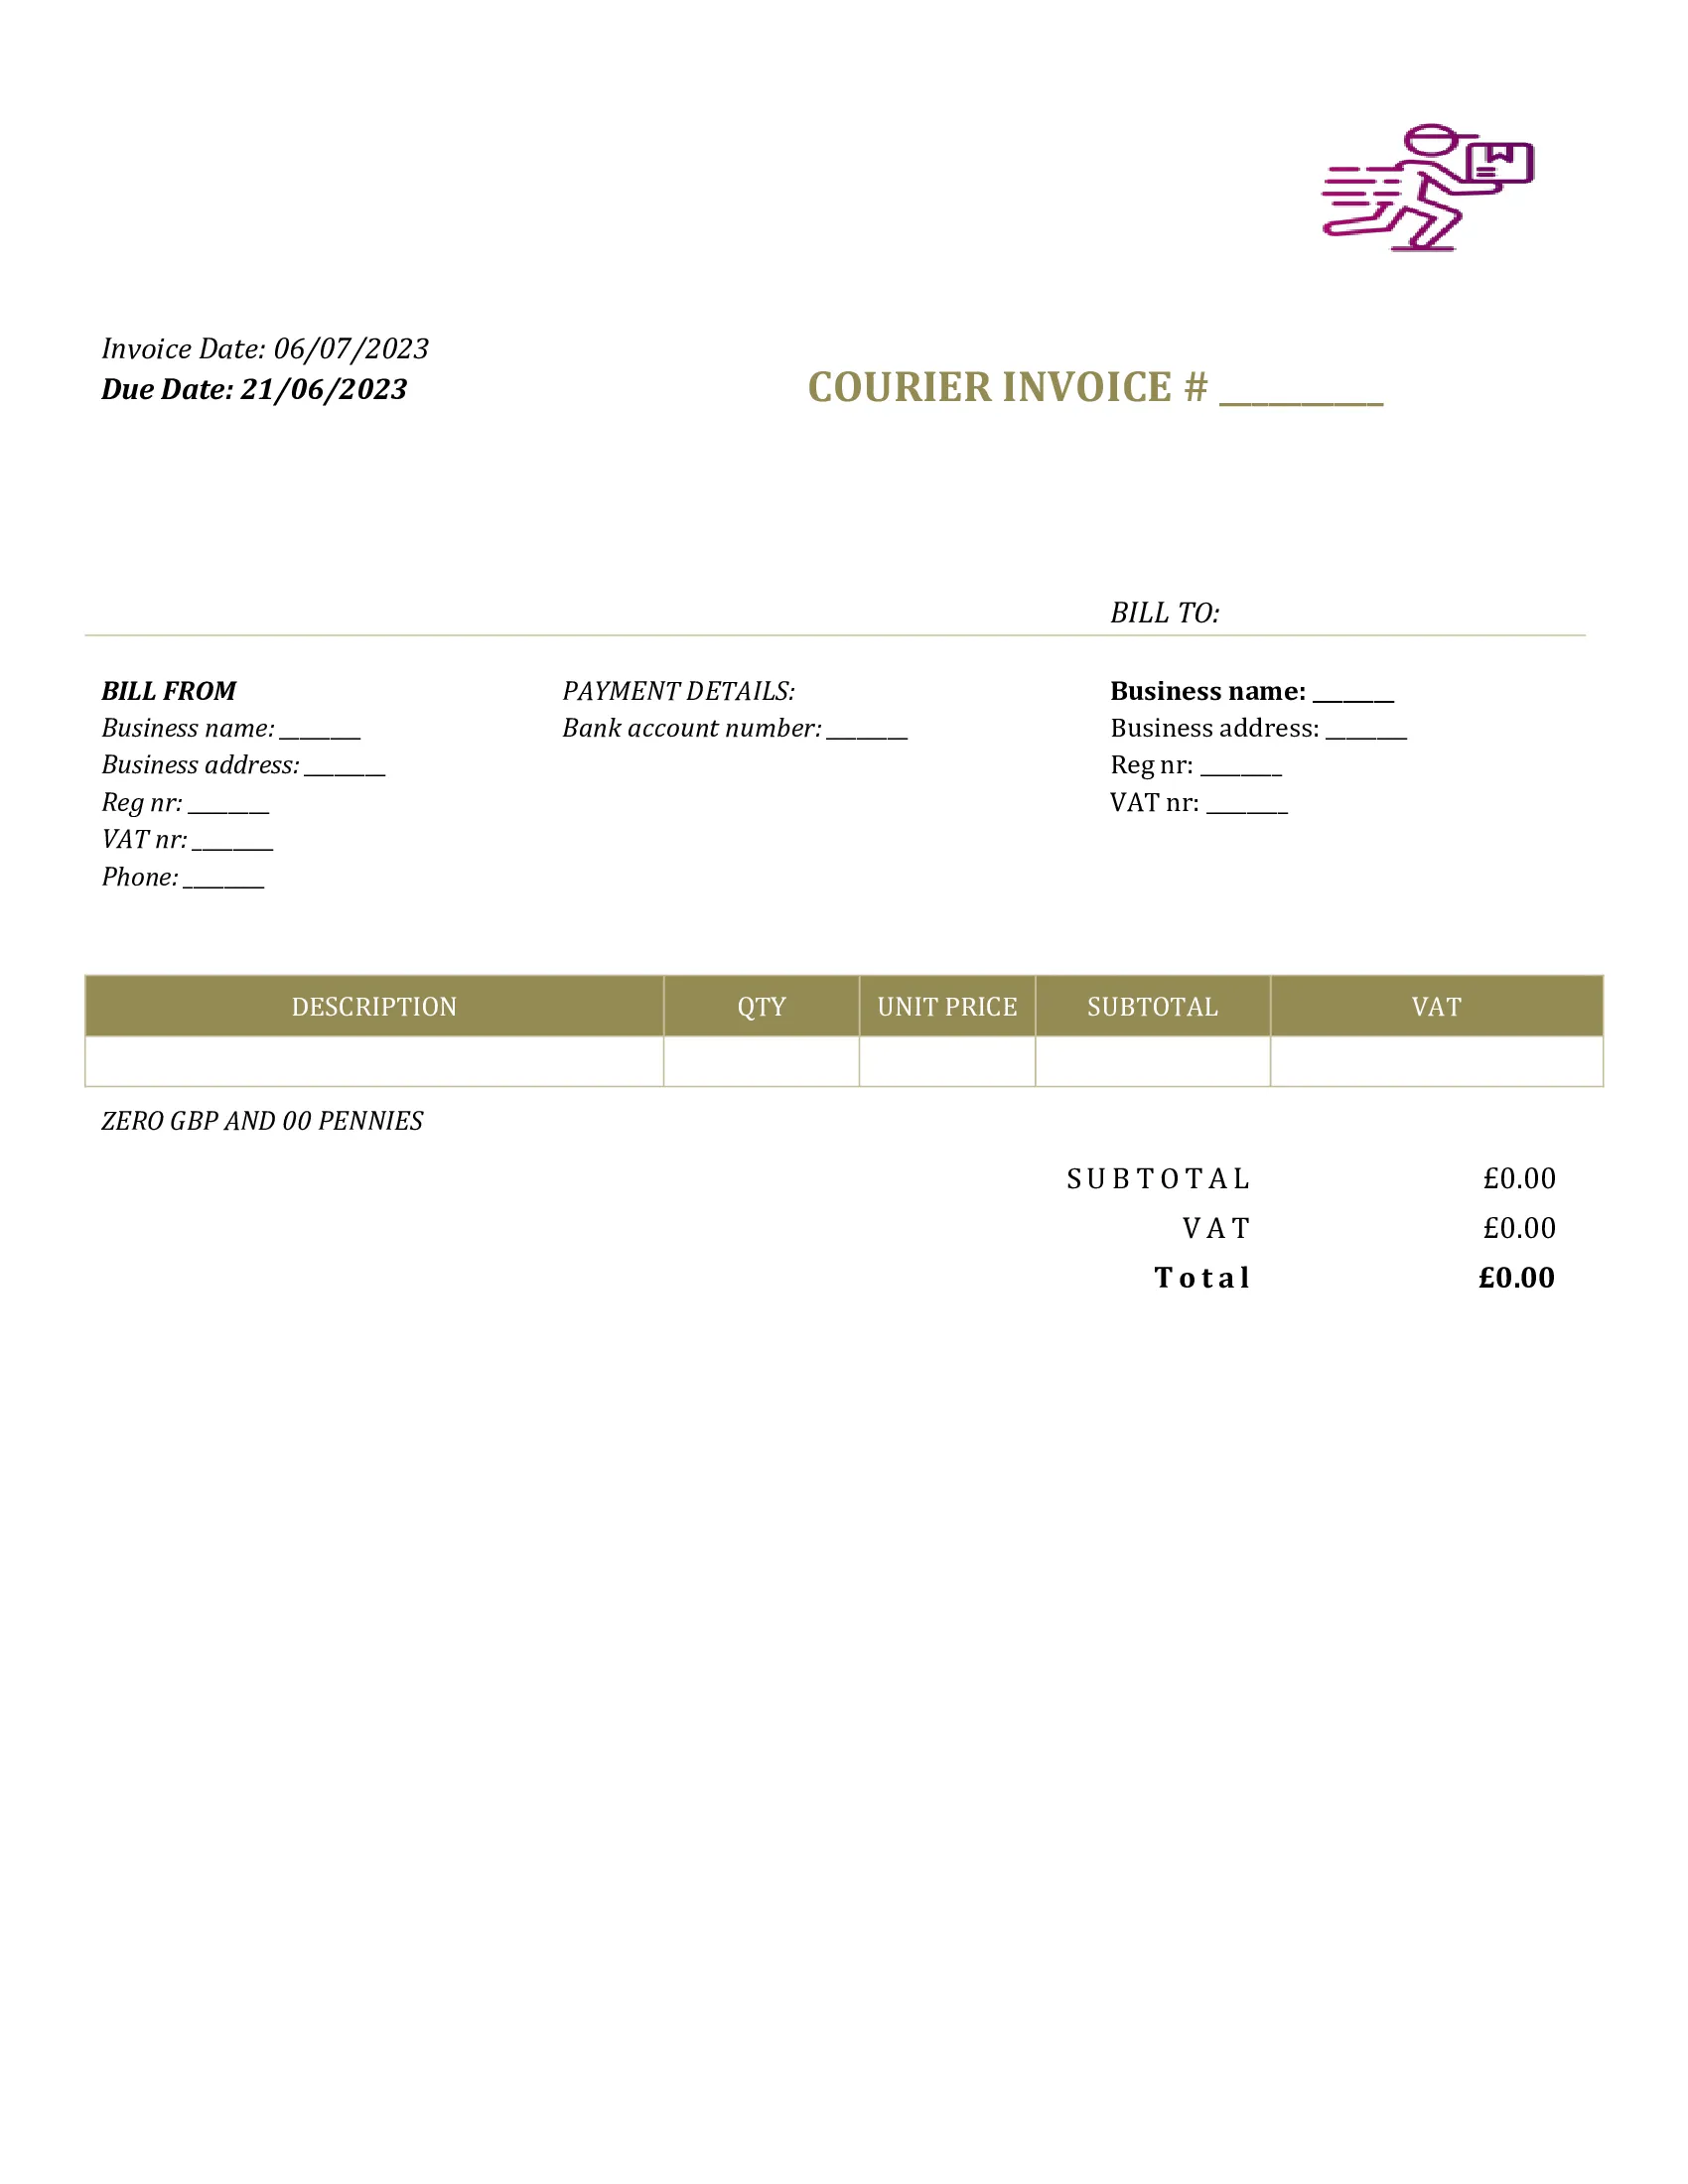 generic courier invoice template UK Word / Google docs